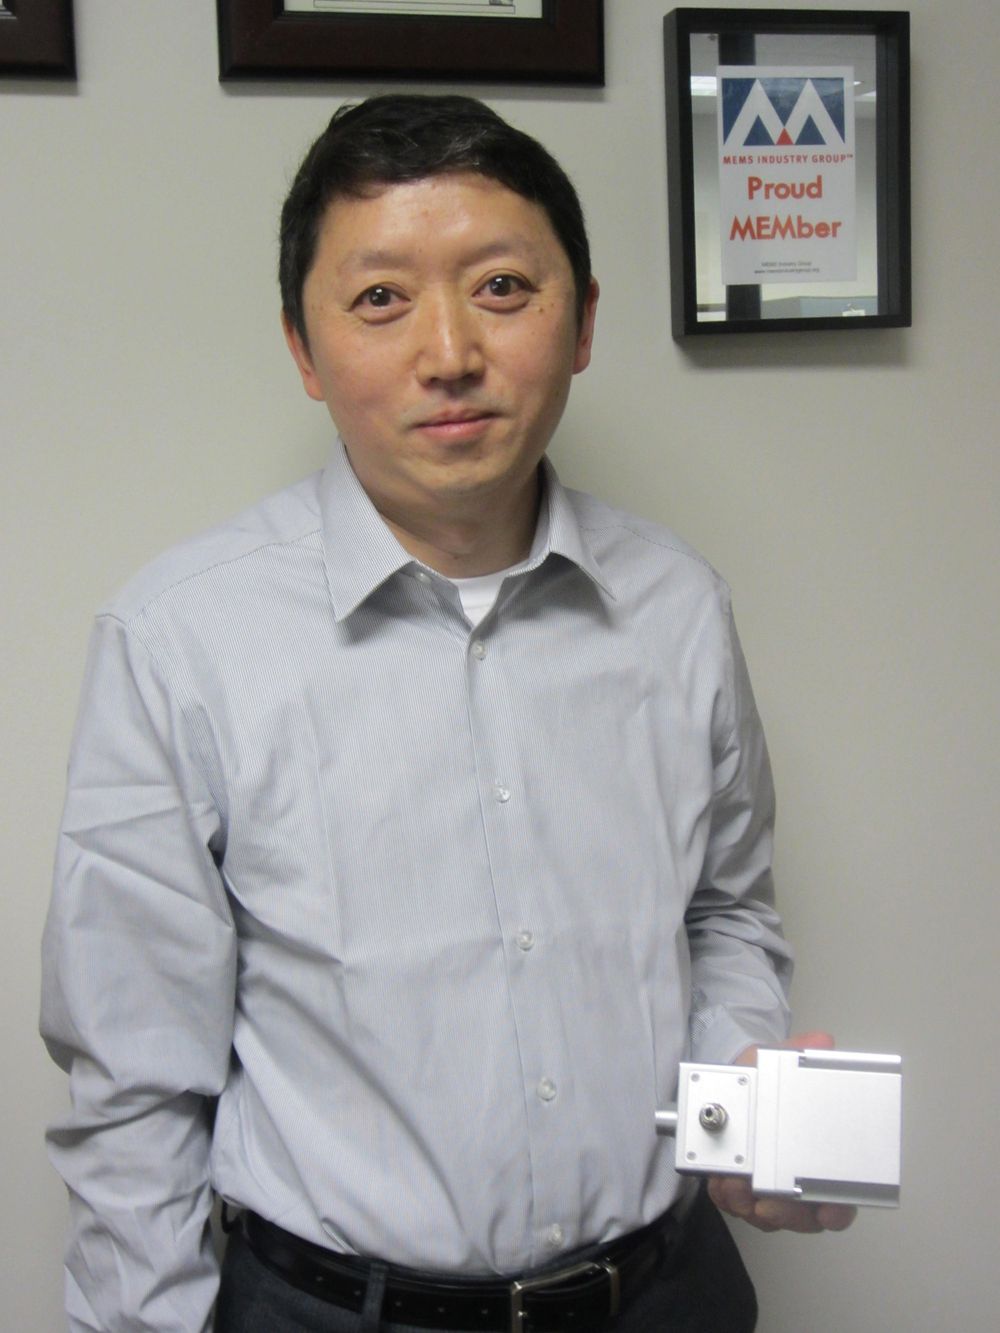 Liji Huang, founder, president and CEO